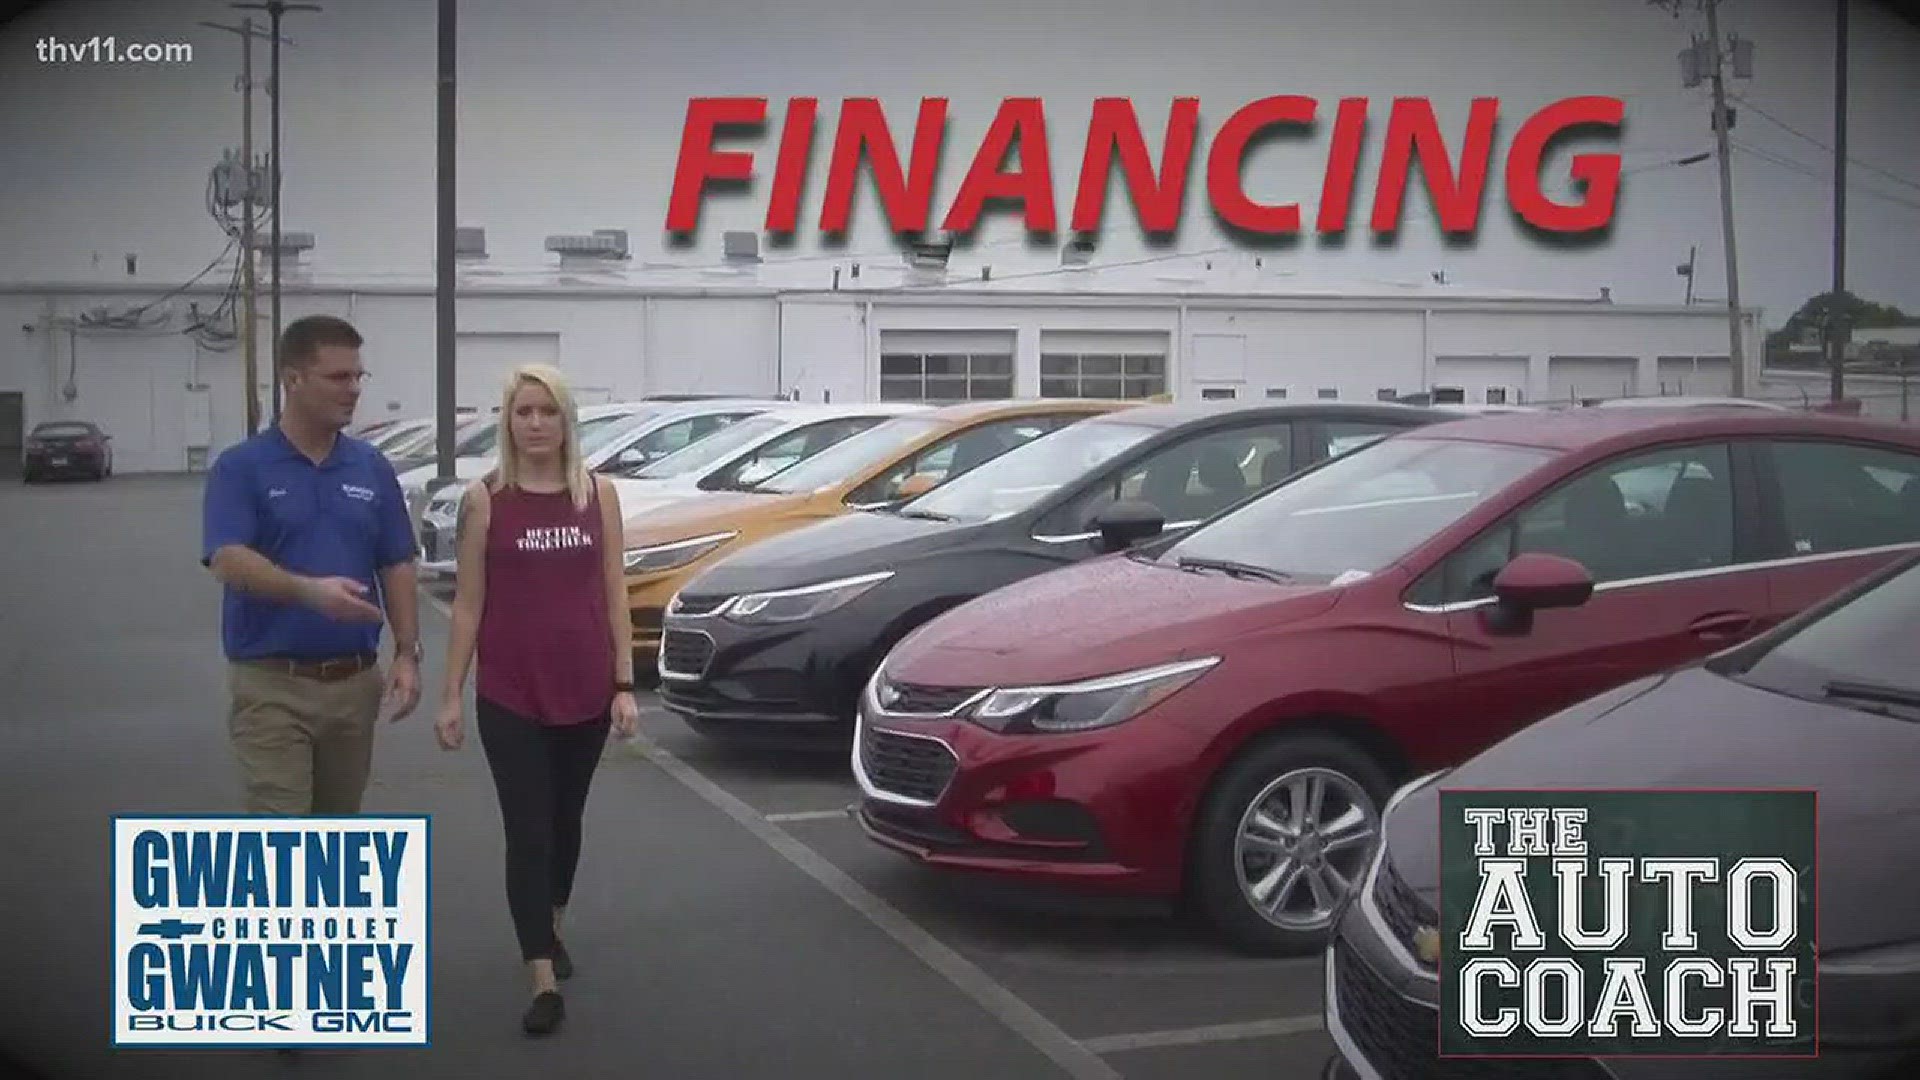 THV11's Auto Coach Jamie Cobb tells us some tips about financing a vehicle.